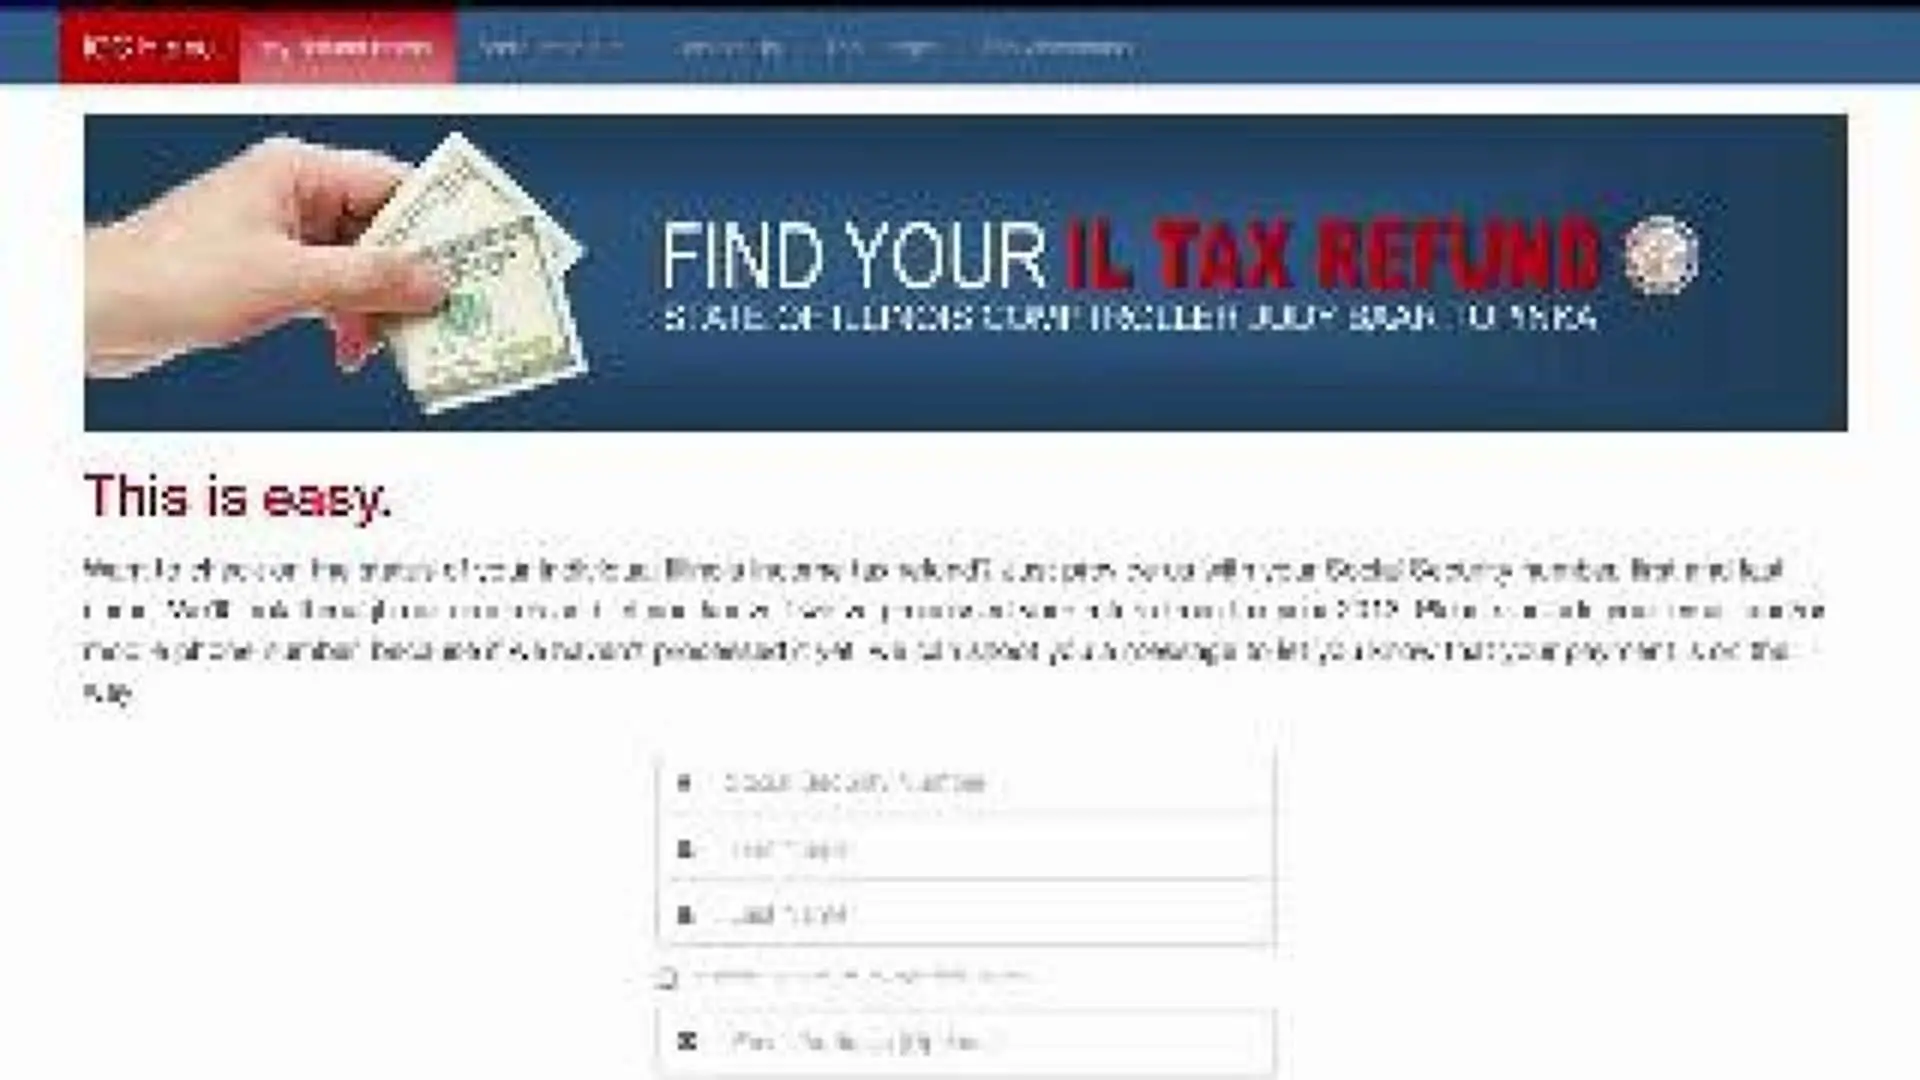 You can track your tax refund online